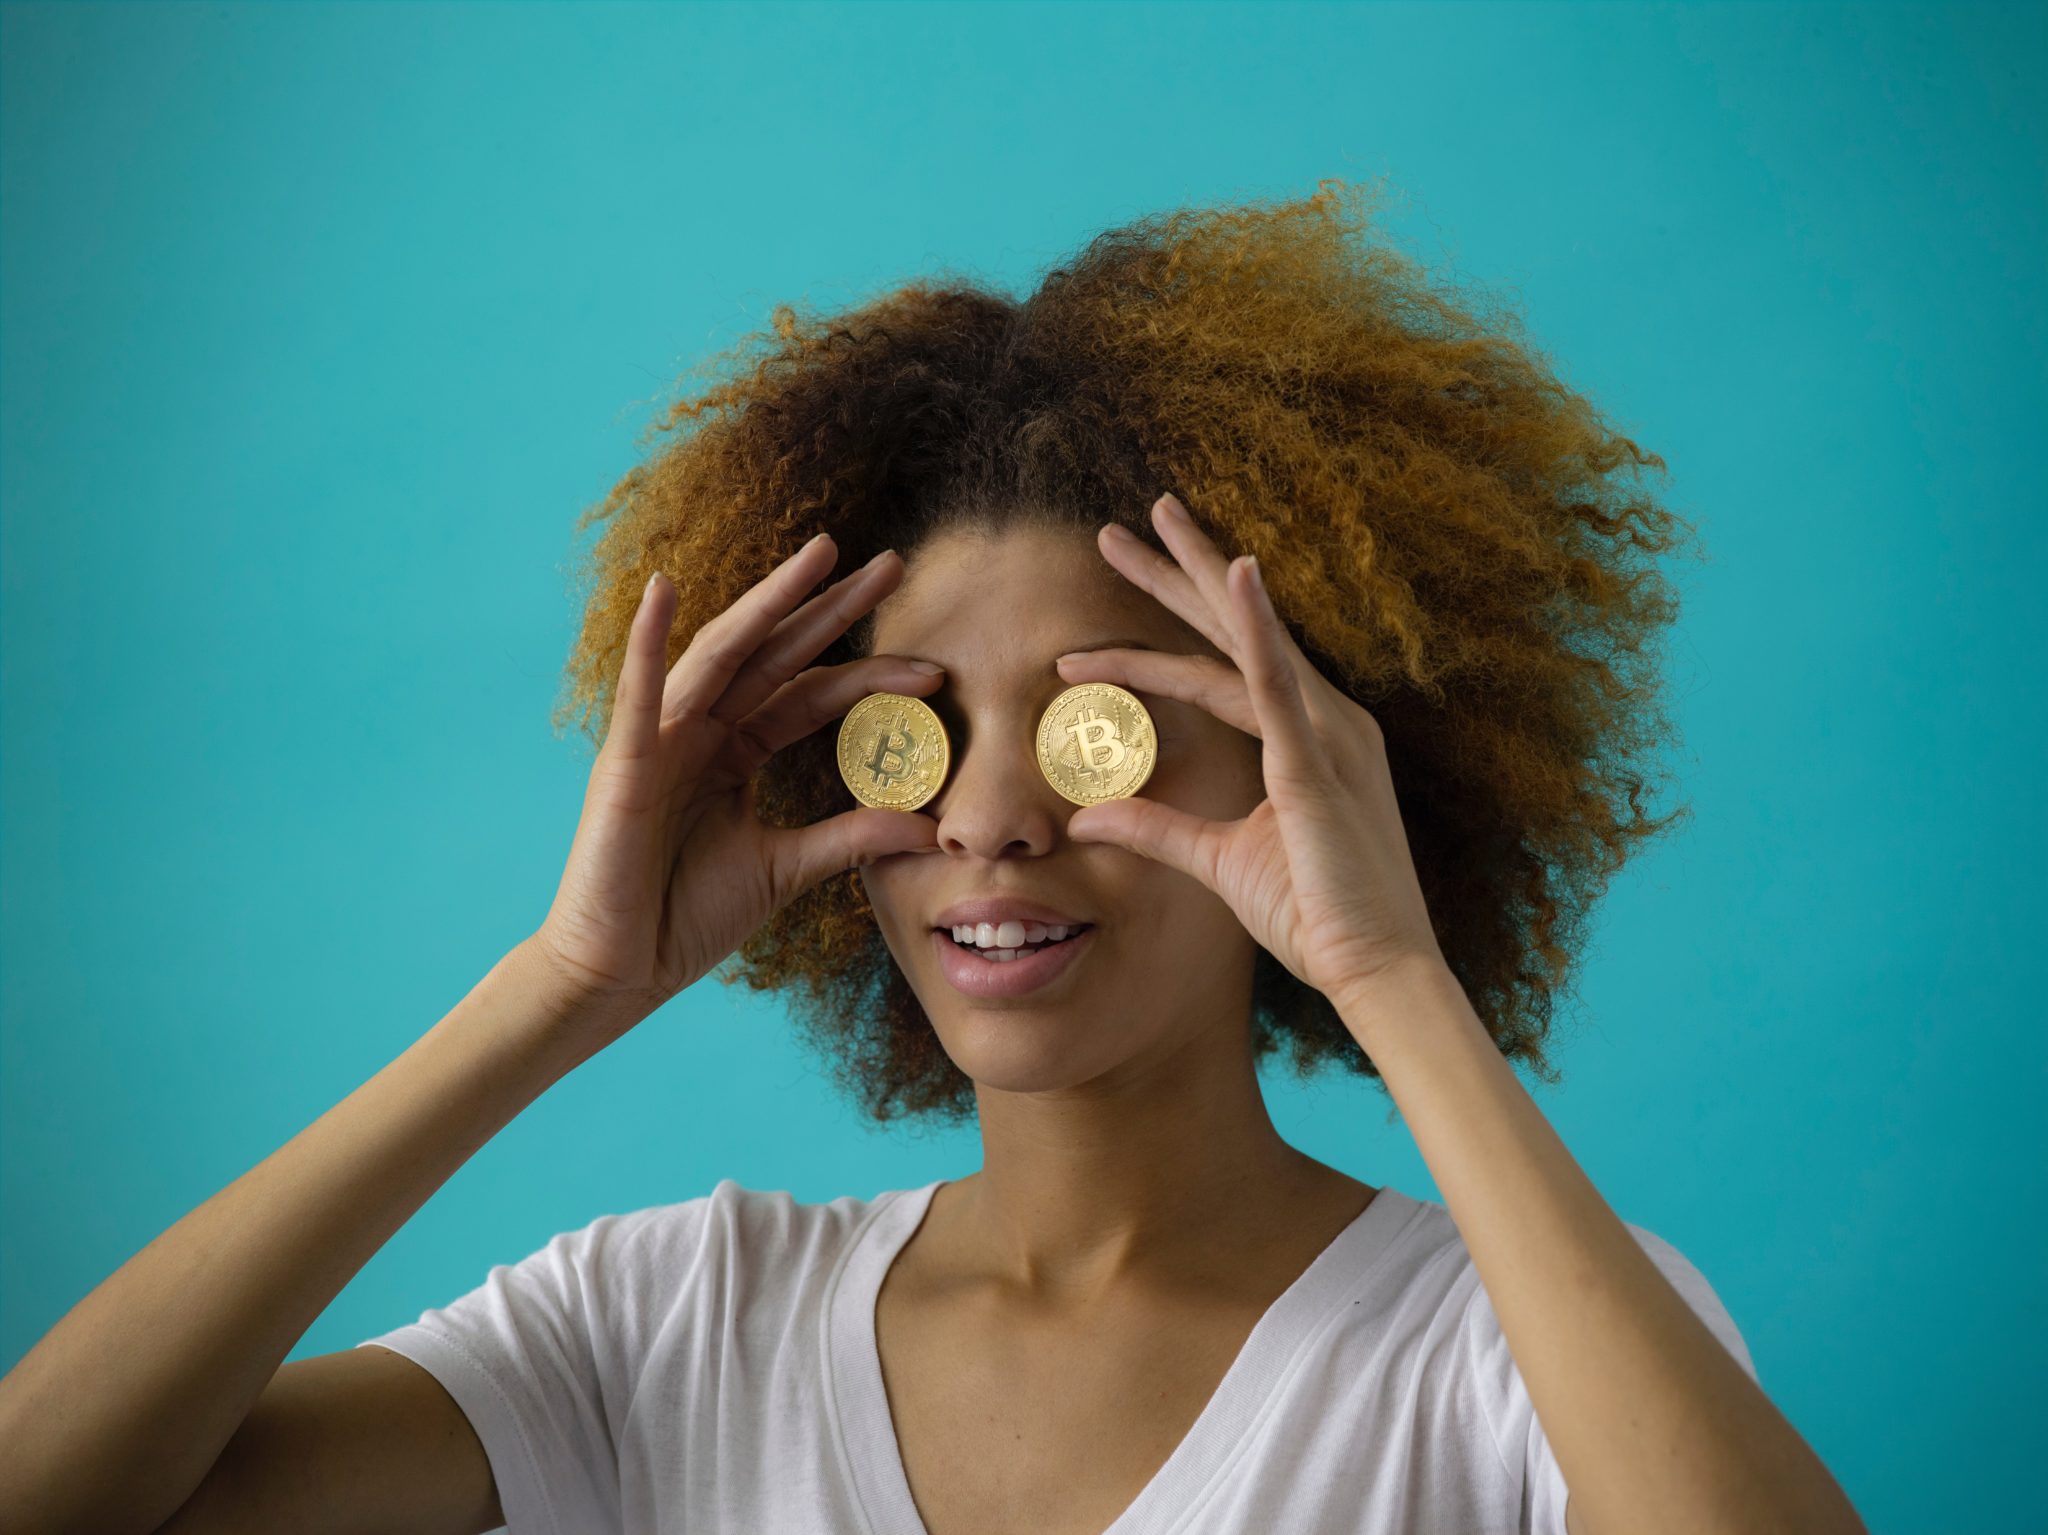  A freelancer holding Bitcoin coins over her eyes, symbolizing the search for competitive rates.